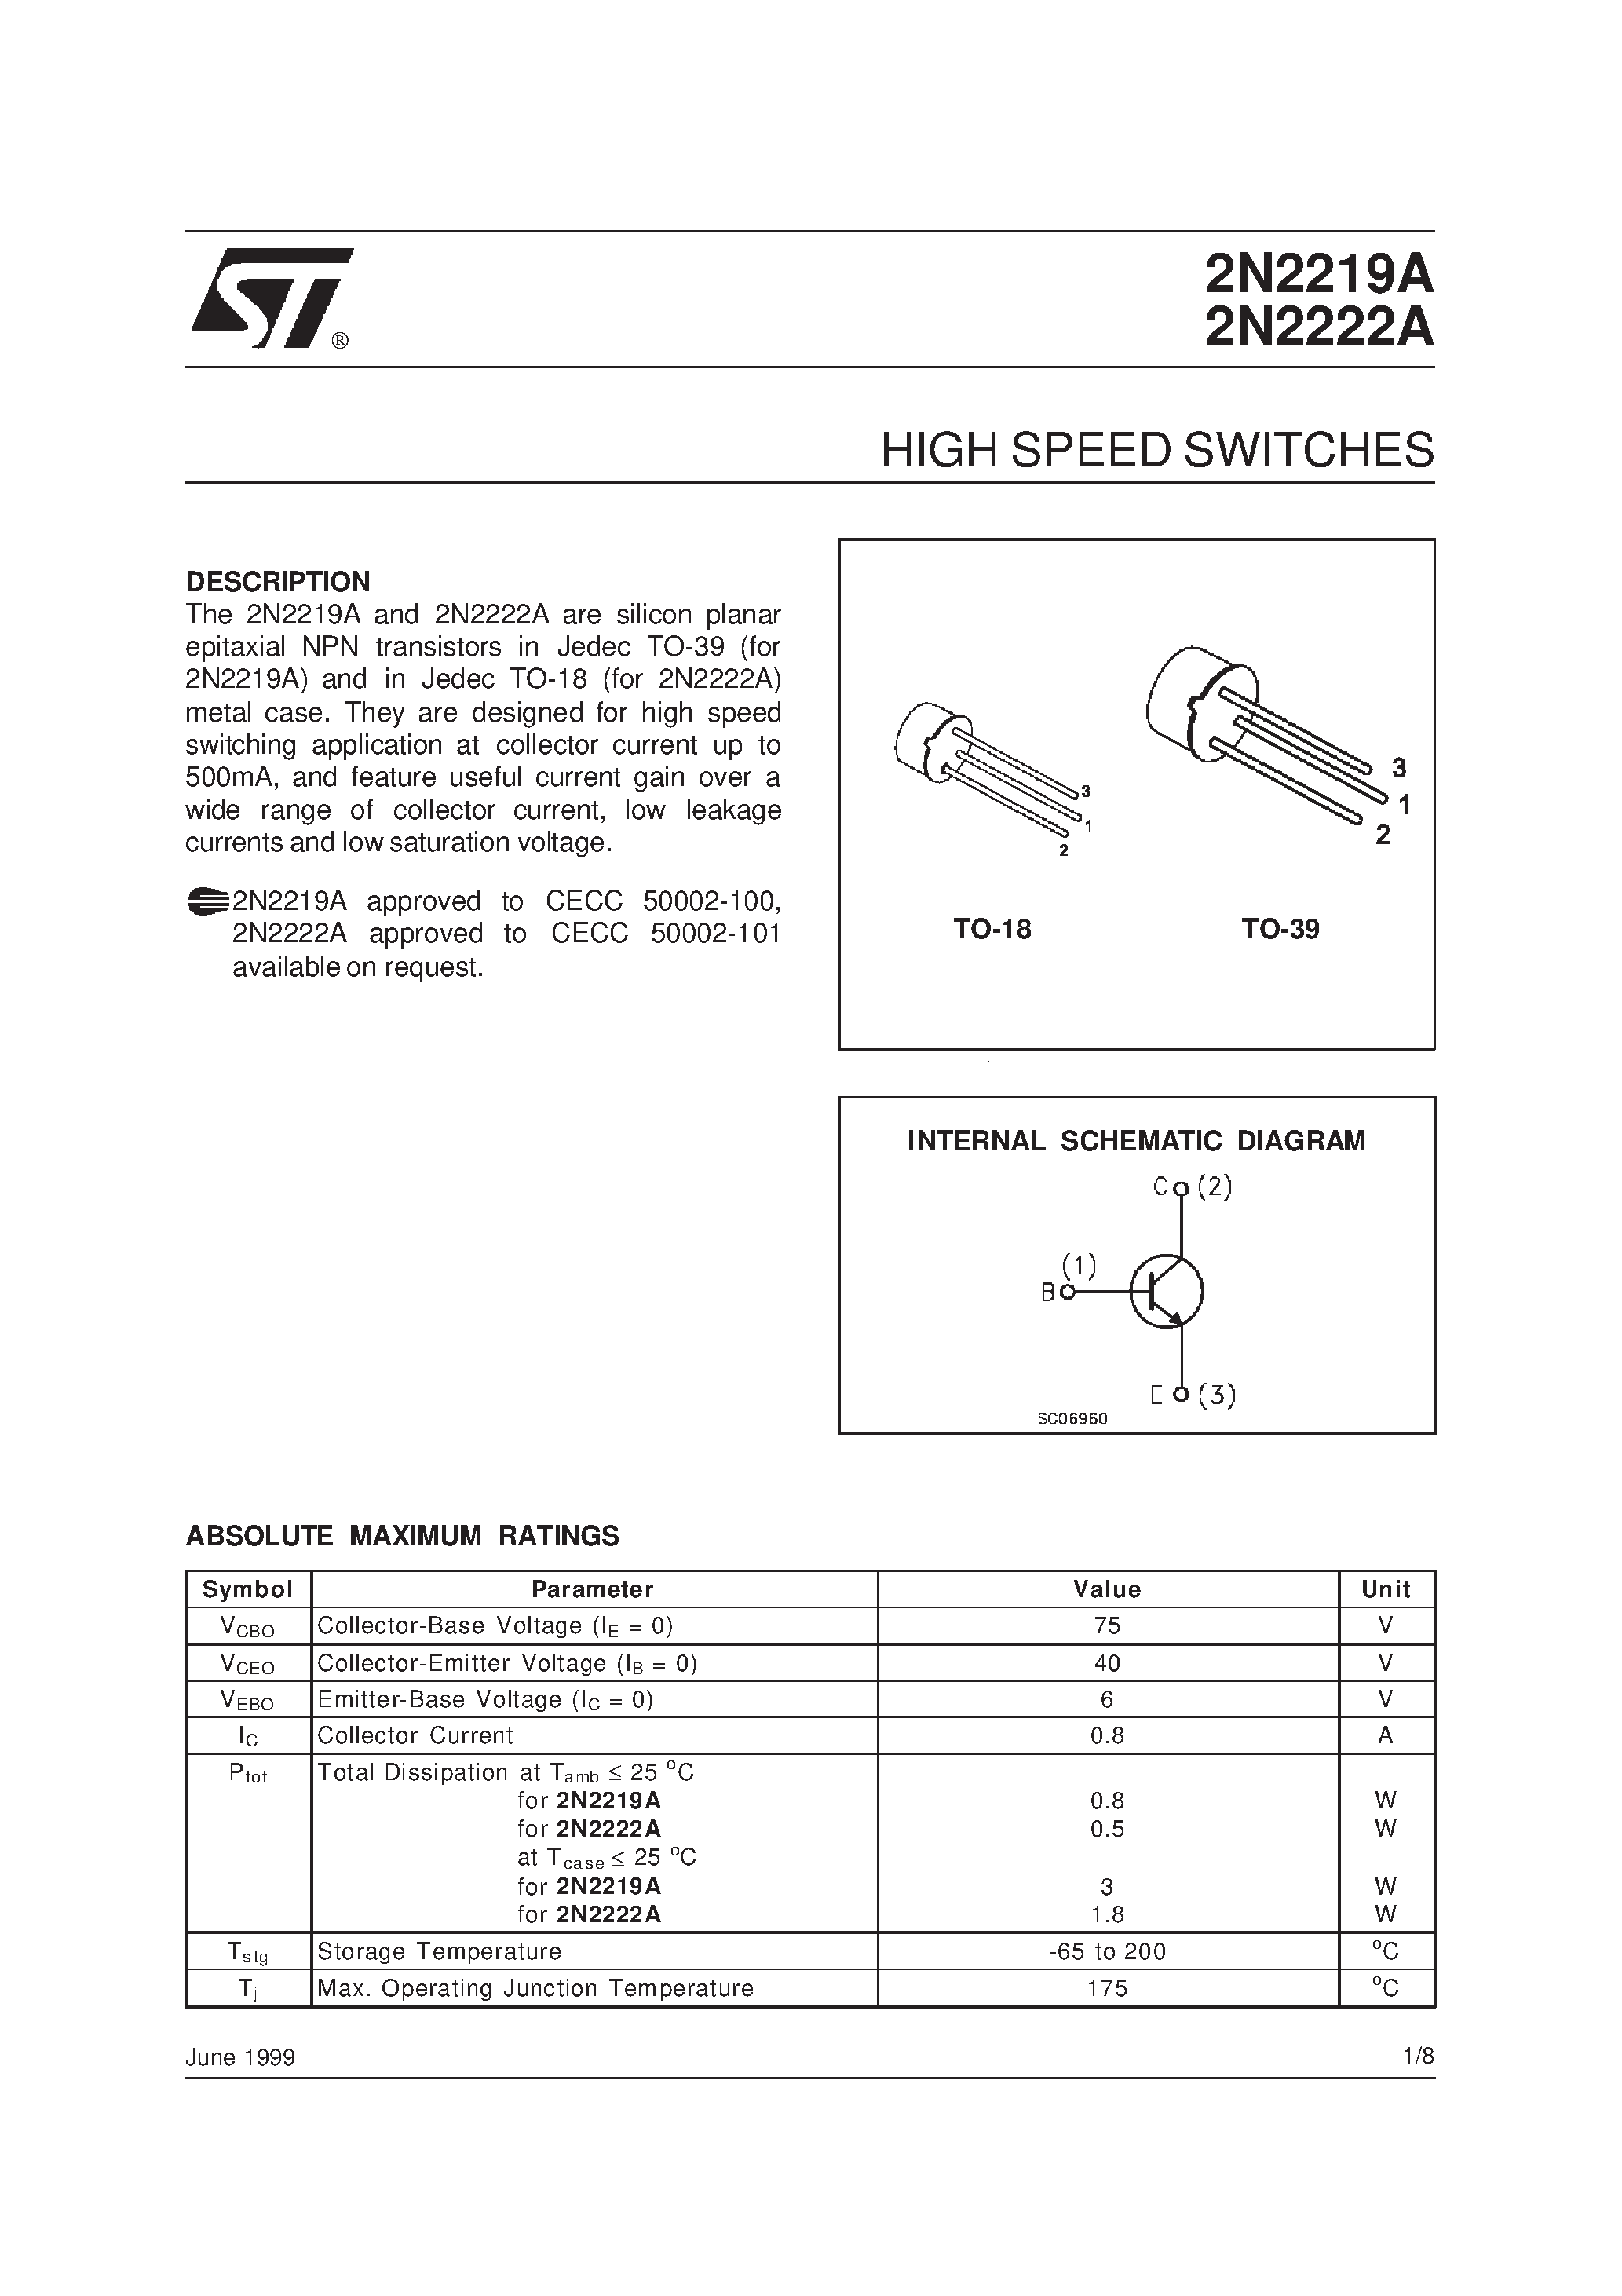 Даташит 2N2219A - HIGH SPEED SWITCHES страница 1